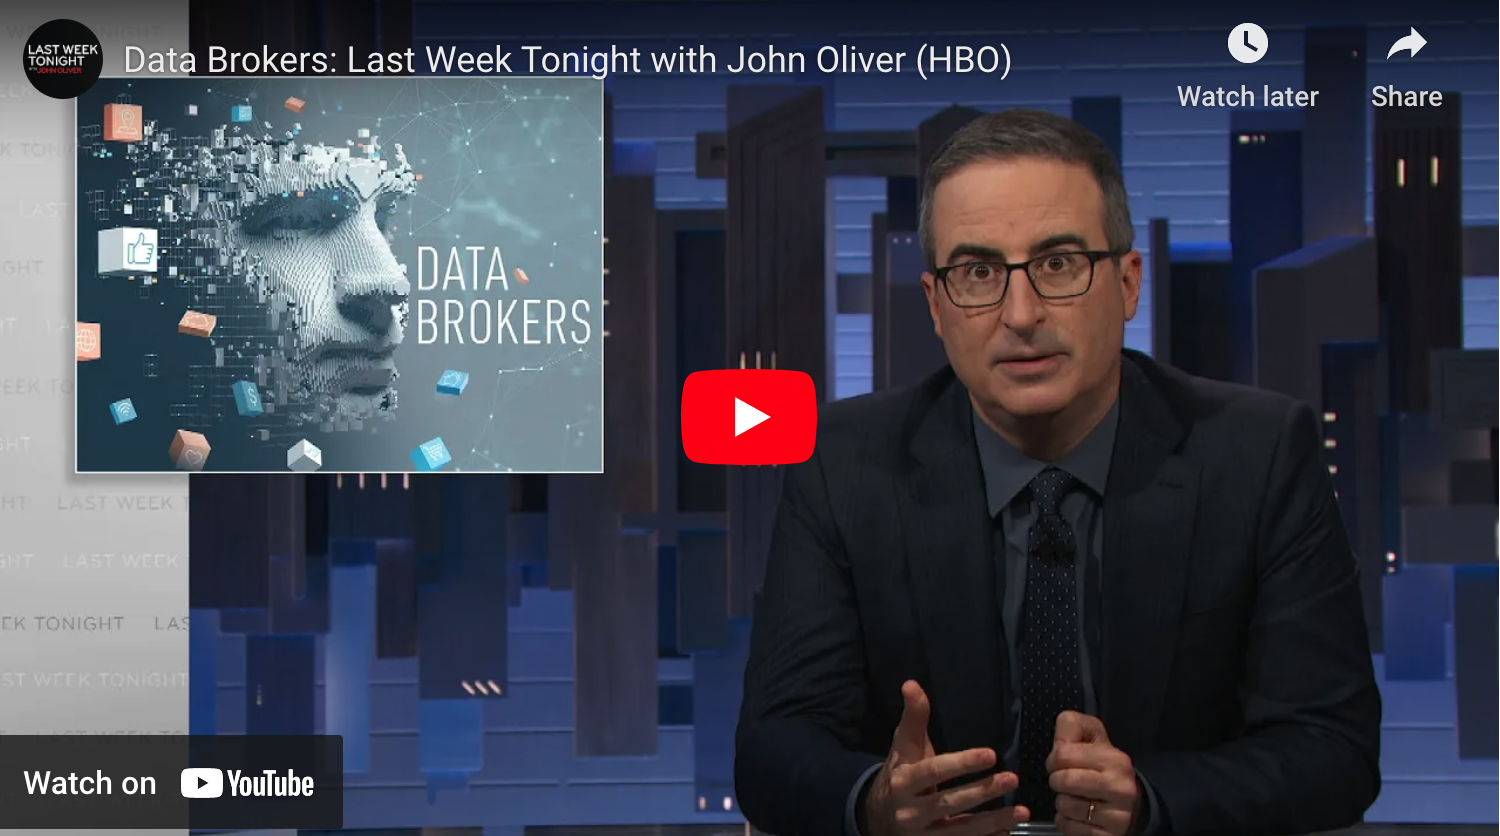 Data Brokers: Last Week Tonight with John Oliver (HBO)￼